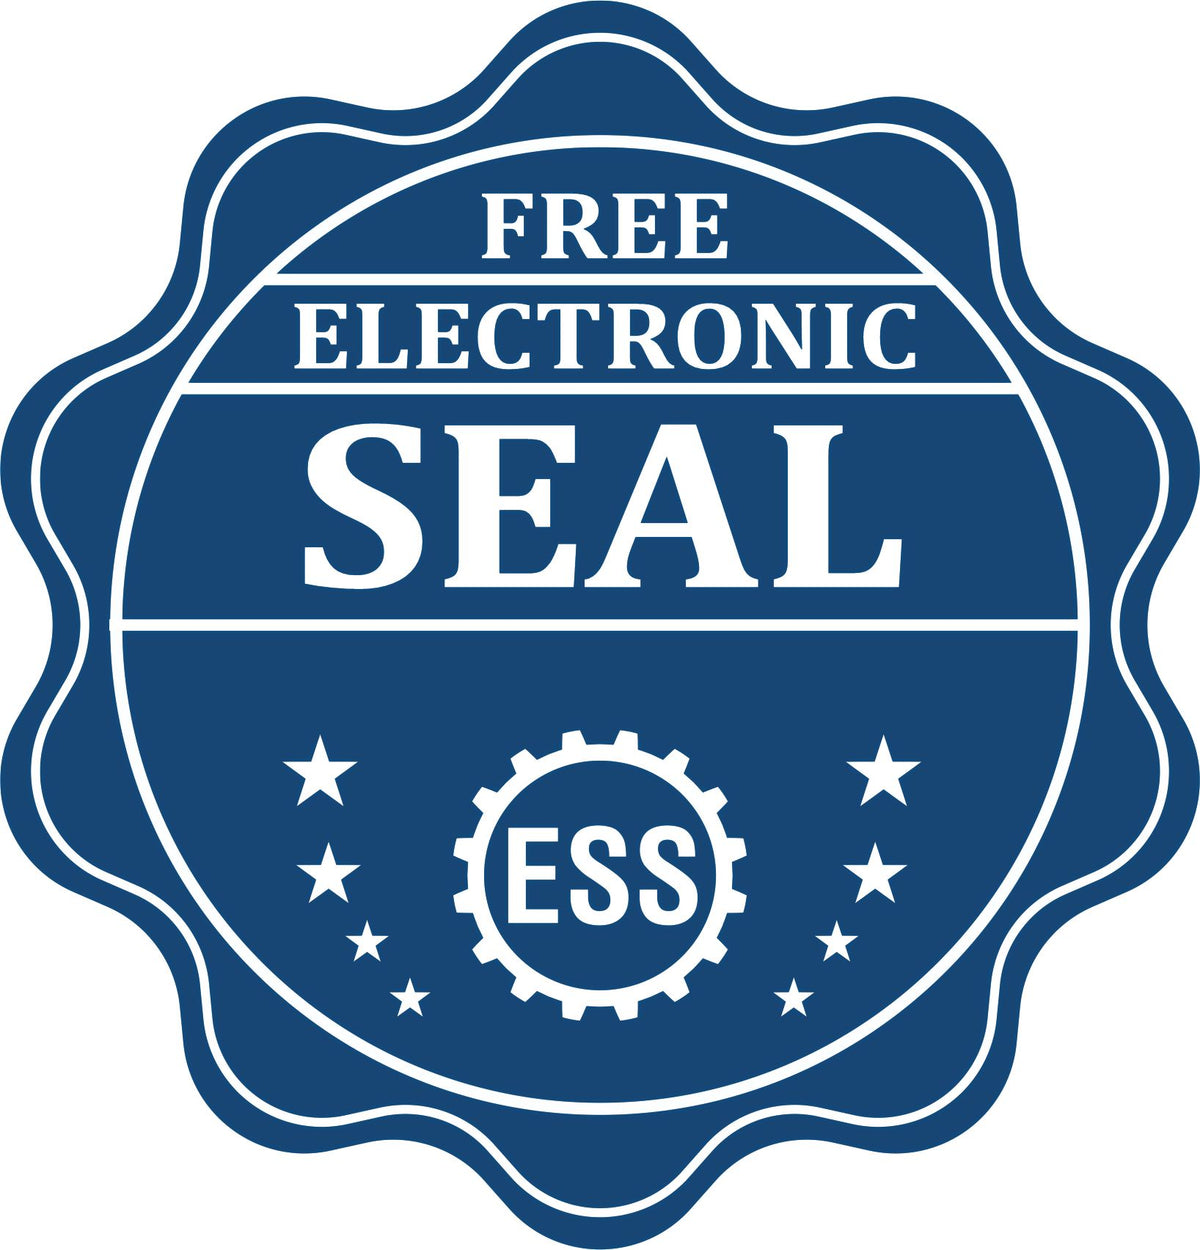 A badge showing a free electronic seal for the Hybrid Iowa Land Surveyor Seal with stars and the ESS gear on the emblem.